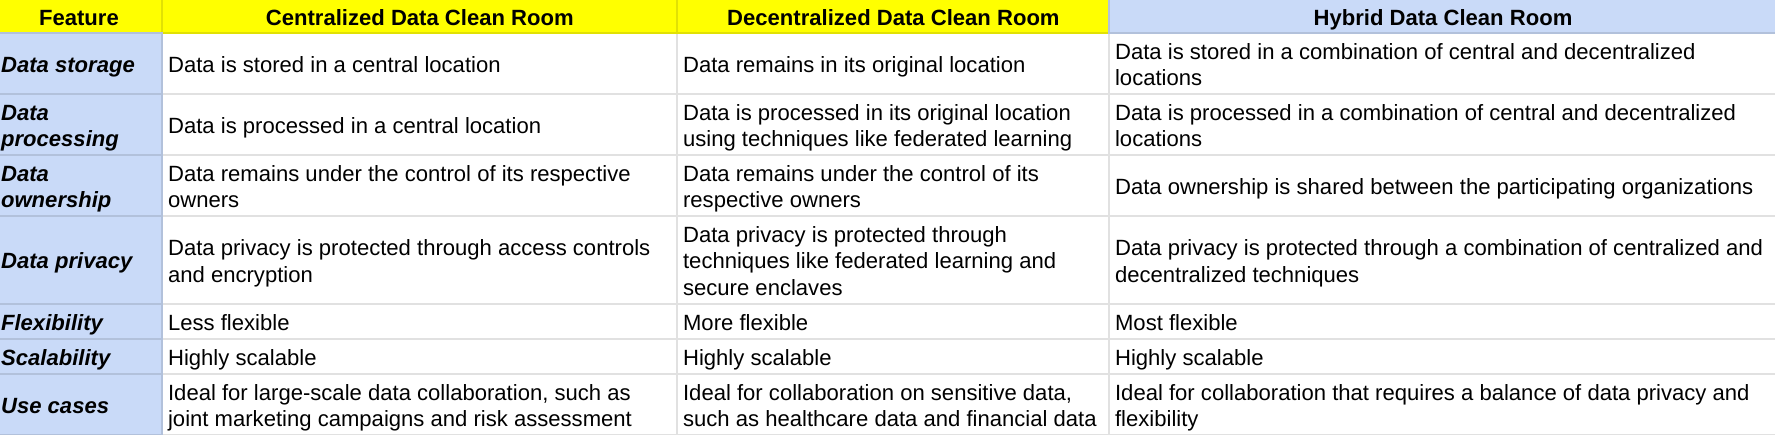 Data, data-driven, data clean rooms, centralized data clean rooms, data driven insights, controlled mechanisms, data sharing, data analysis, data governance, data compliance, decentralized data clean rooms, privacy, data movement, hybrid data clean rooms, tailored solutions, scalability, data sensitivity, technology, data privacy, 